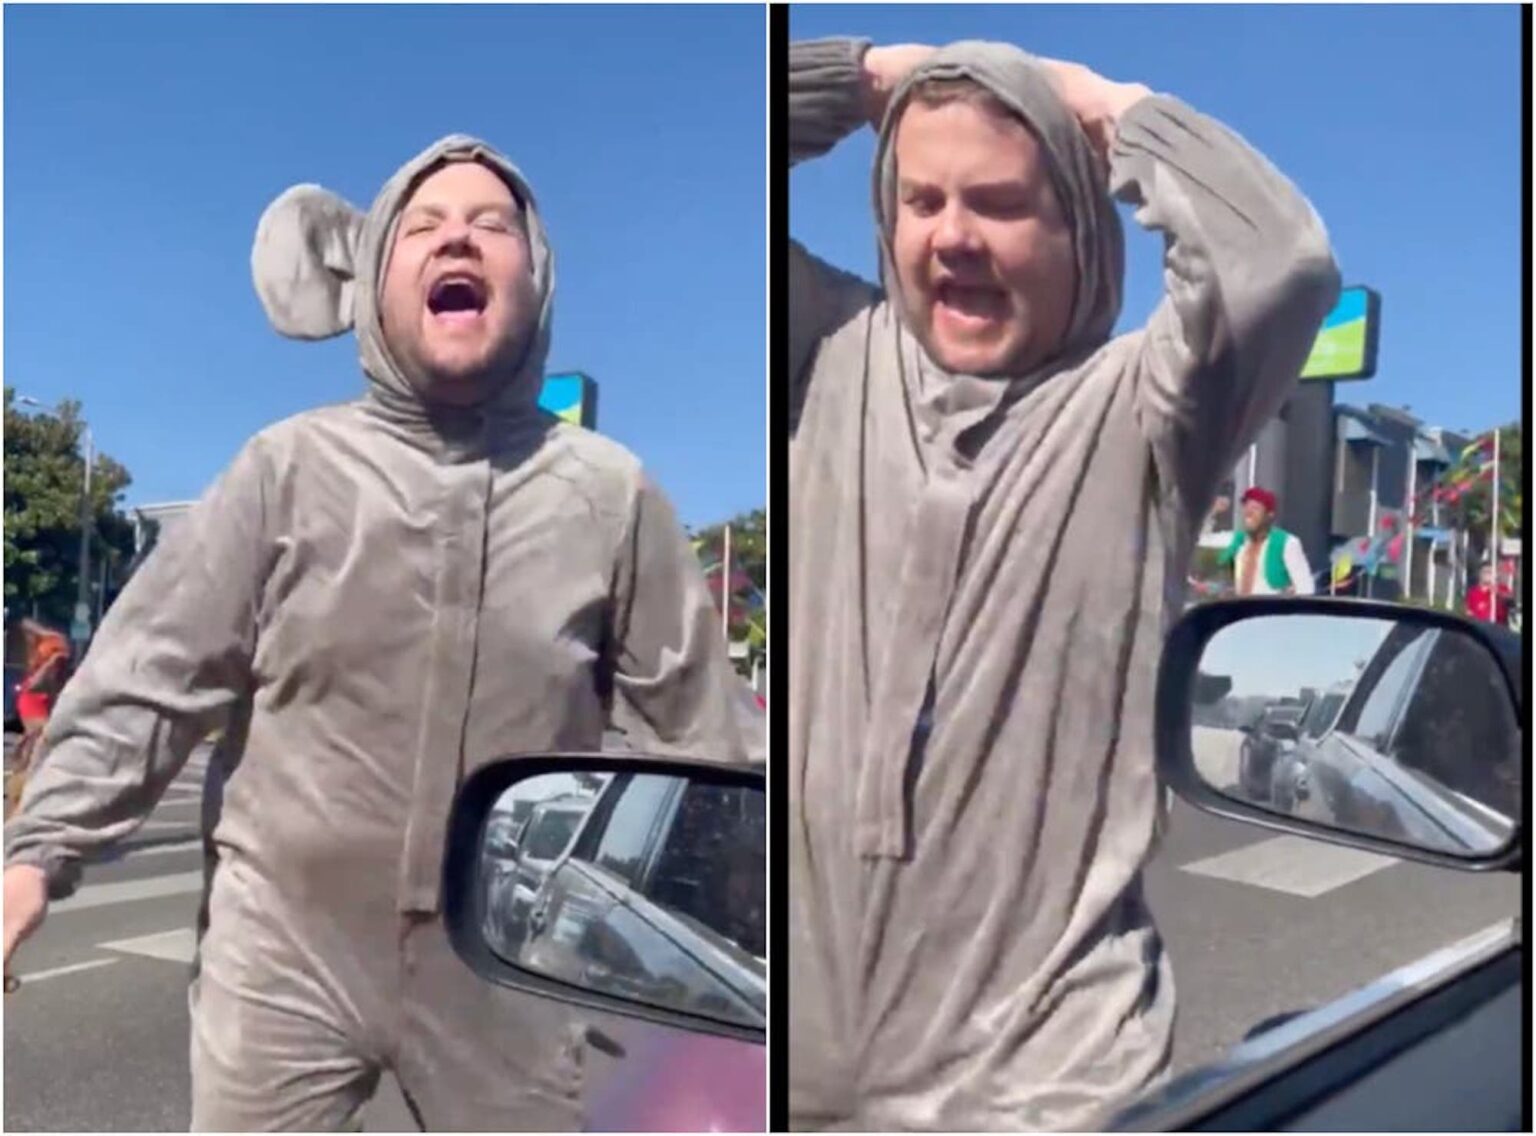 James Corden dressed as a thrusting crotch mouse to promote the new 'Cinderella' movie on 'The Late Late Show'. Twitter shares their horror with the world.